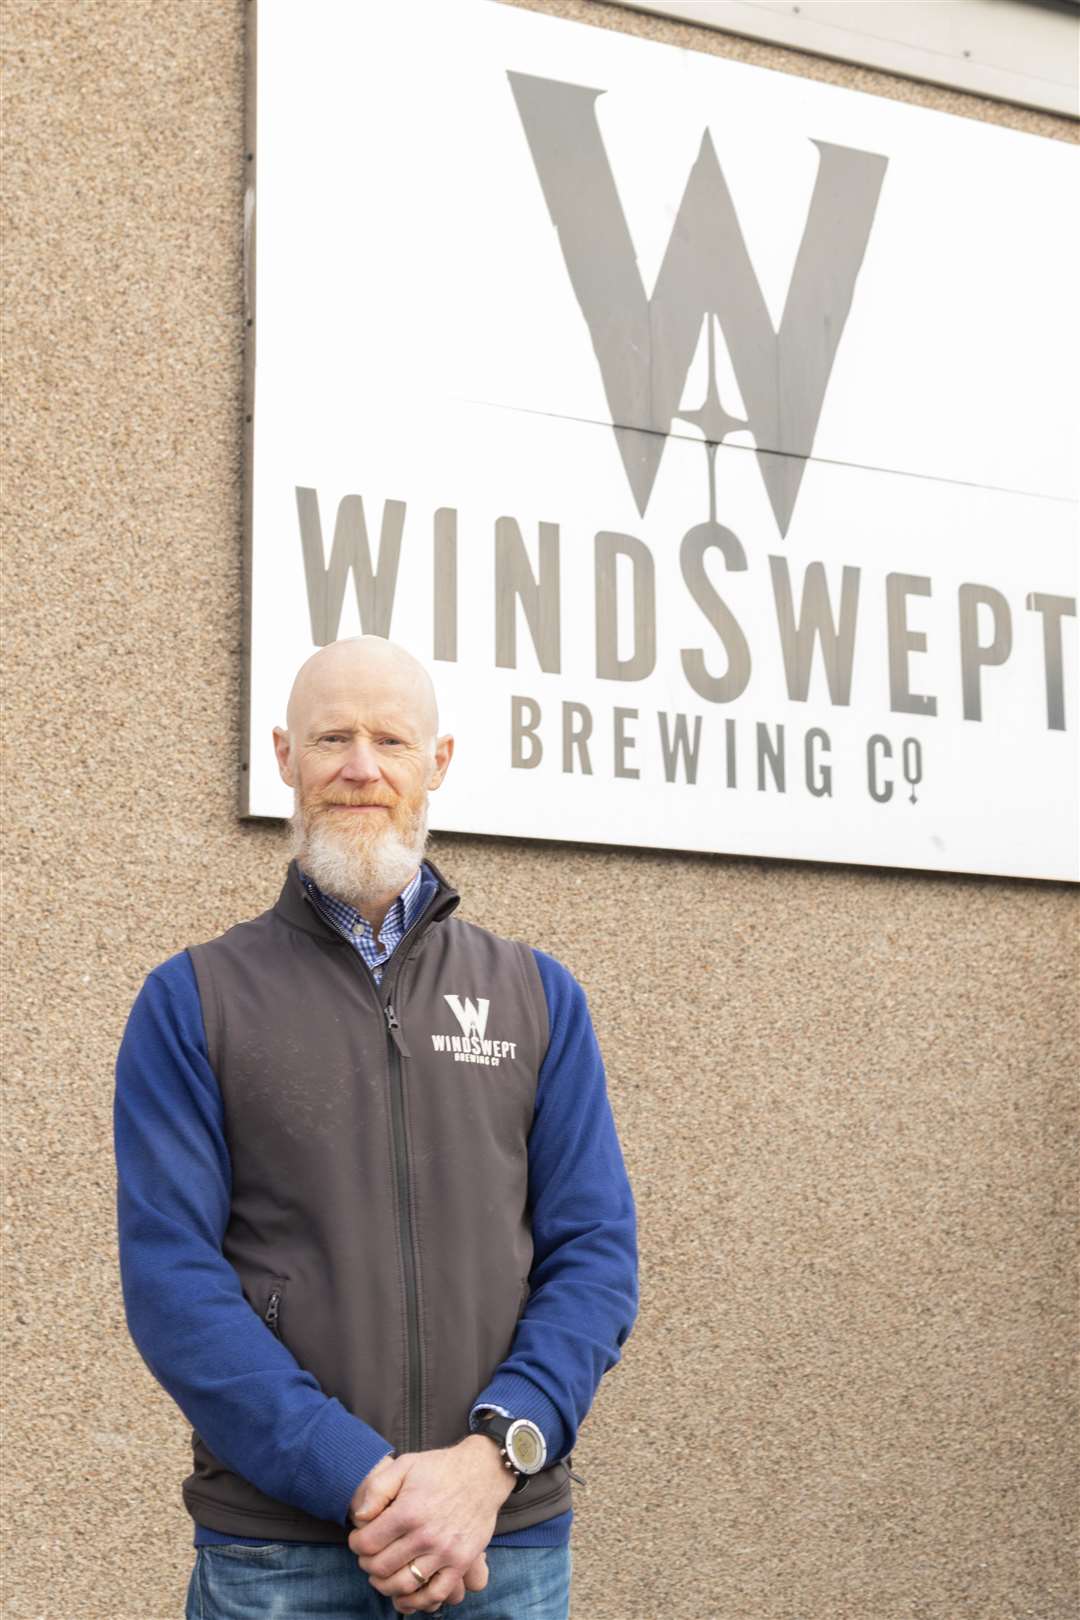 Managing Director, Nigel Tiddy, from Windswept Brewery in Lossiemouth